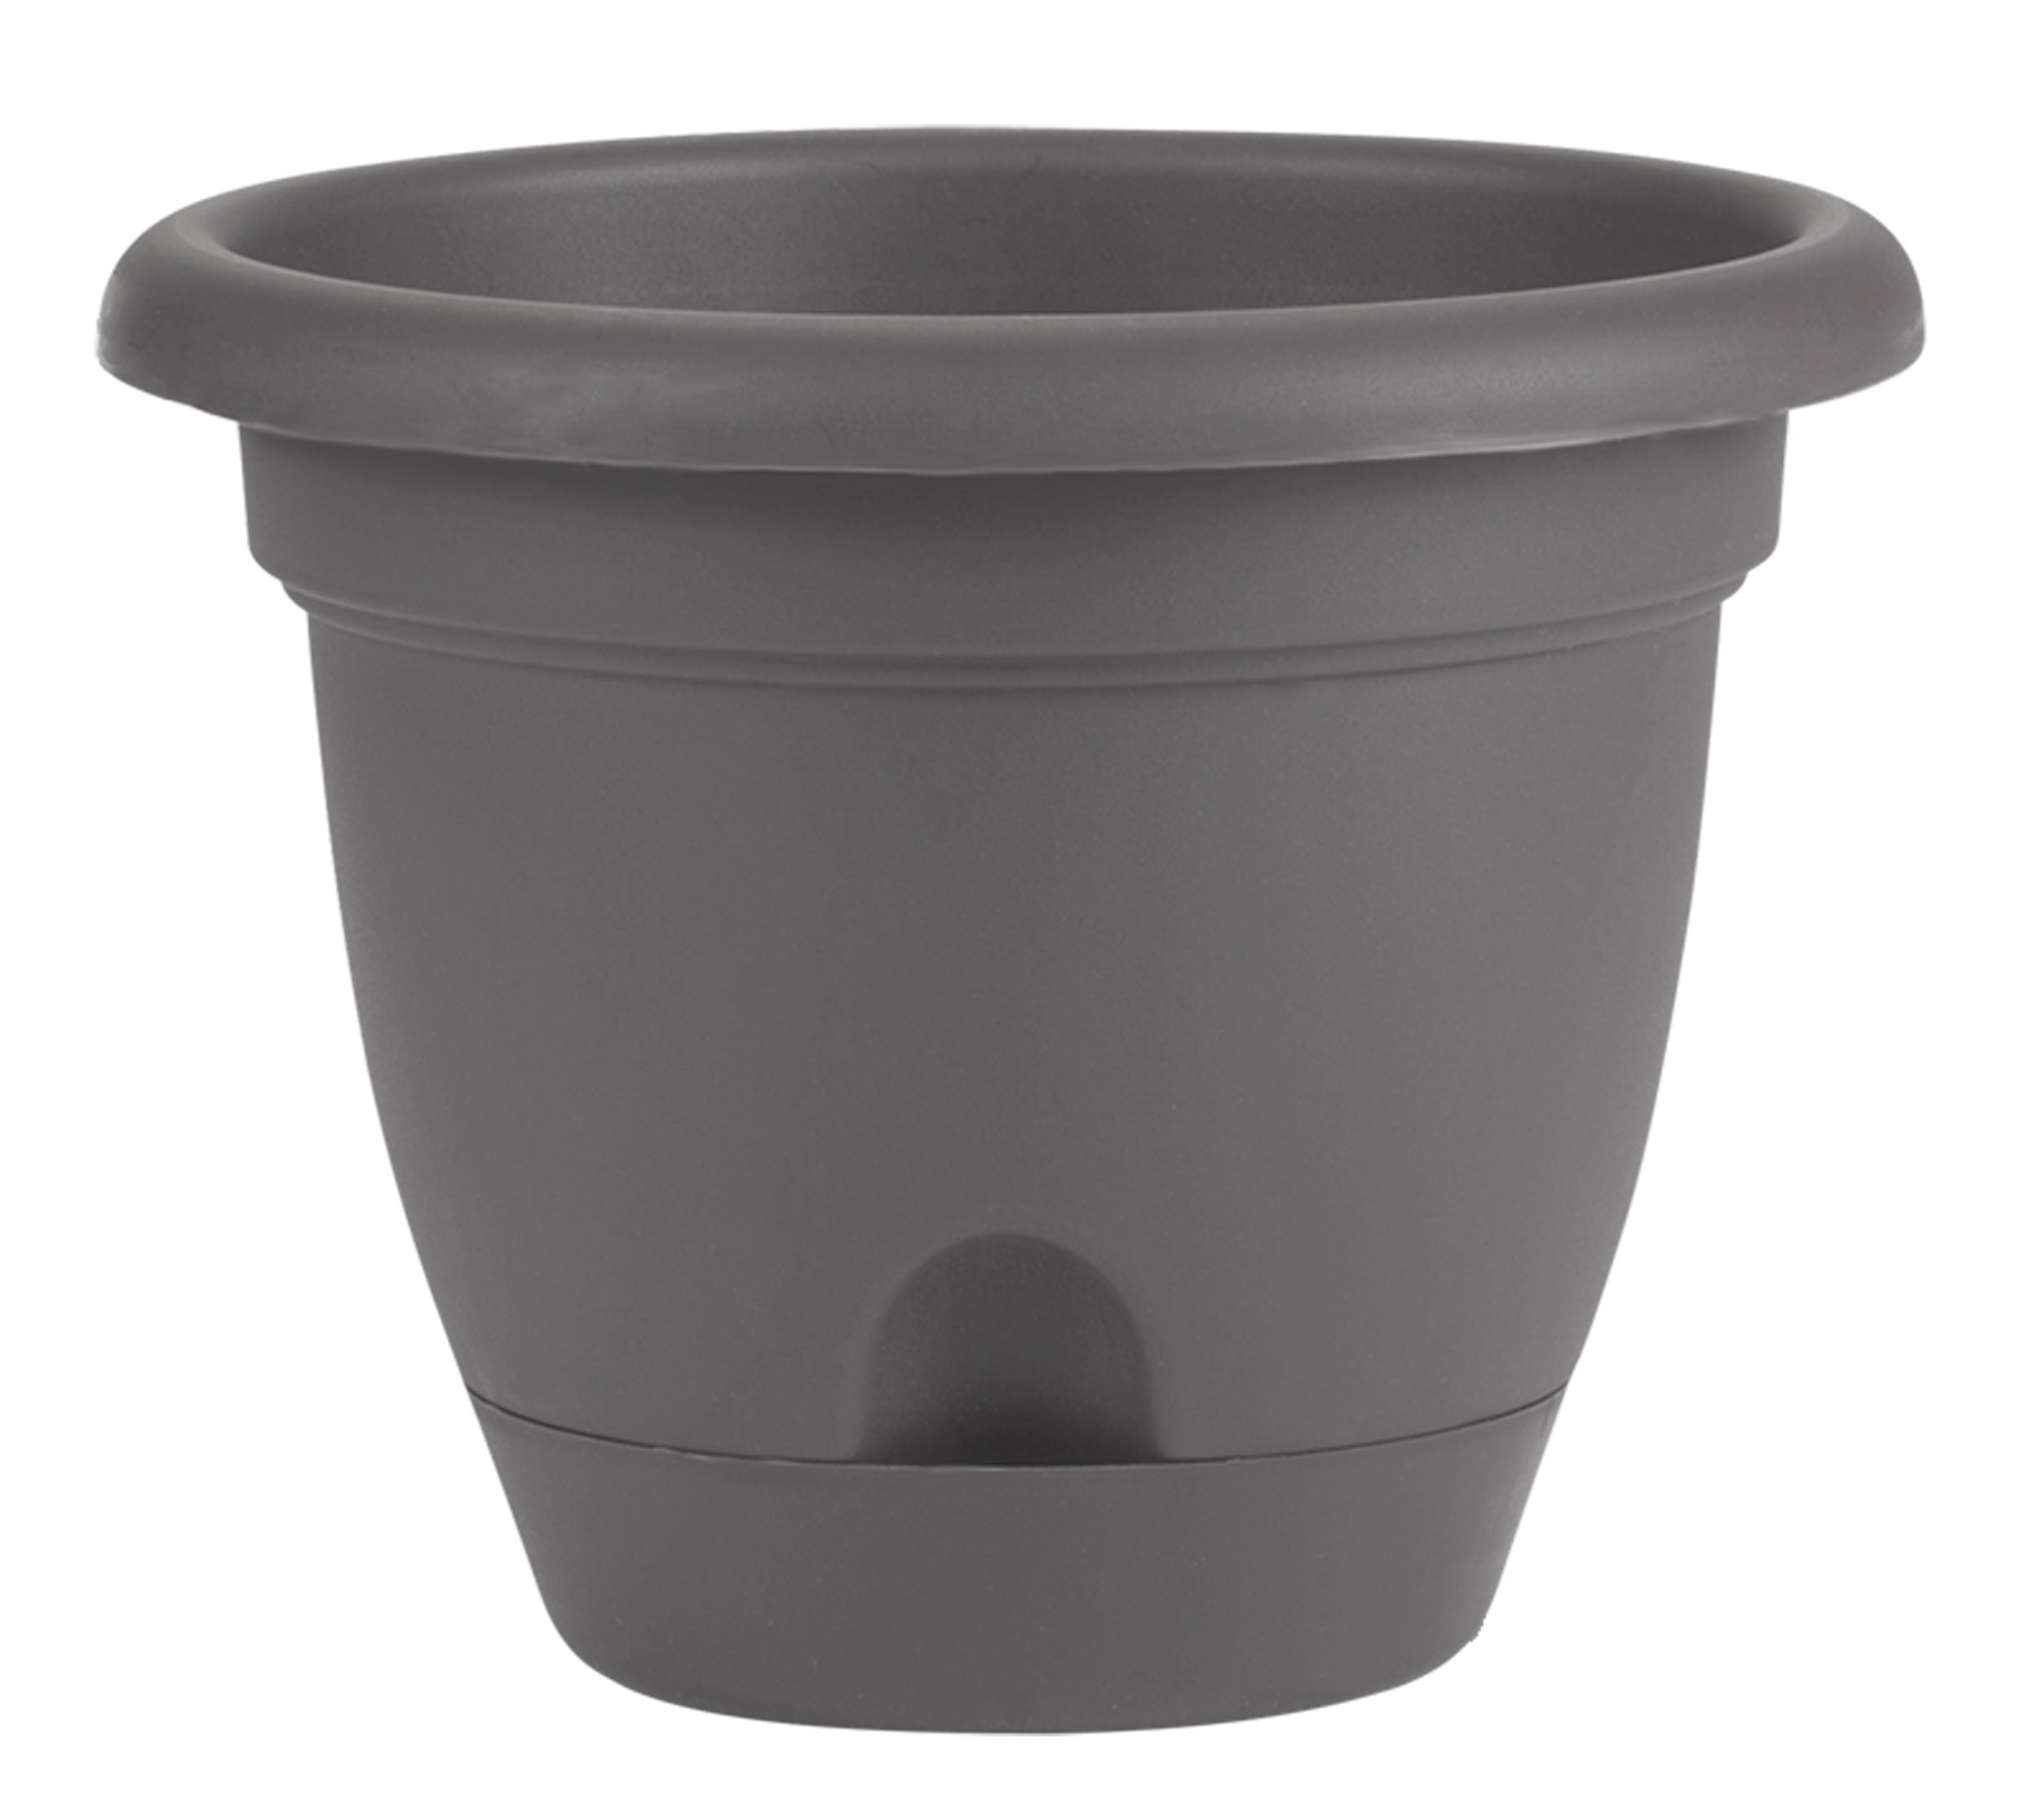 Lp12908 12 In. Lucca Self Watering Planter With Saucer, Charcoal